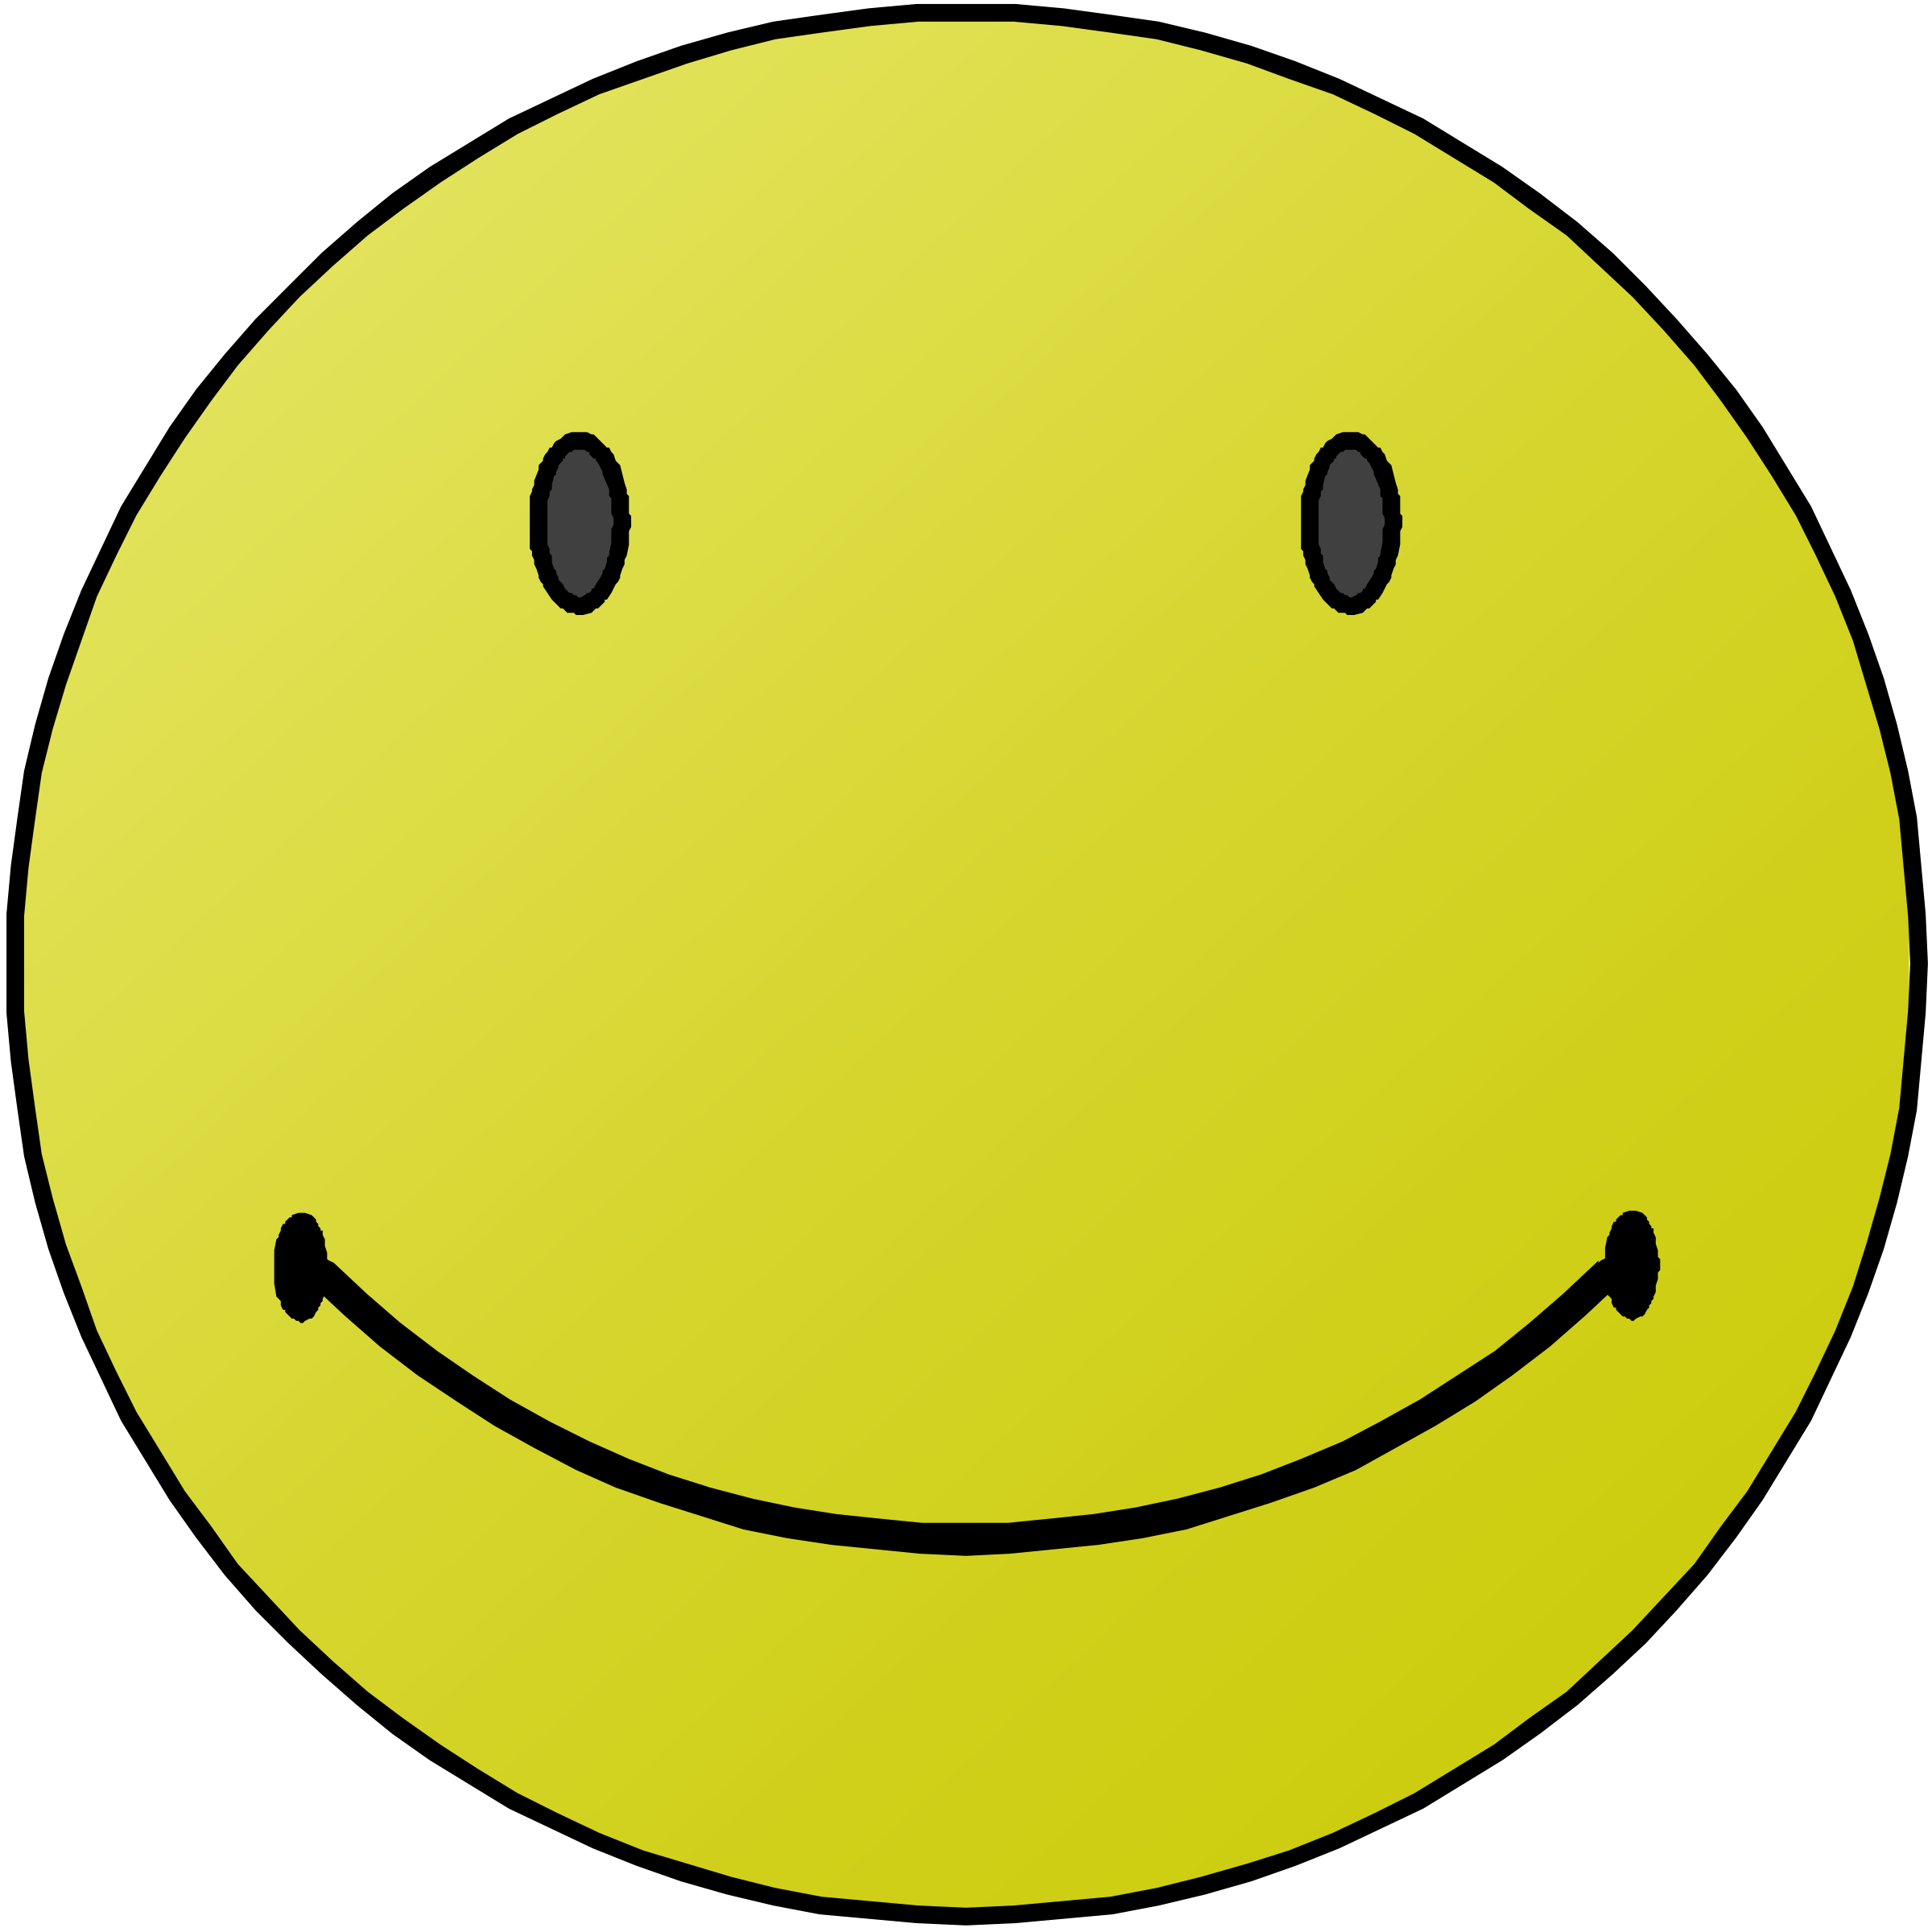 Free Happy Face Pic, Download Free Clip Art, Free Clip Art